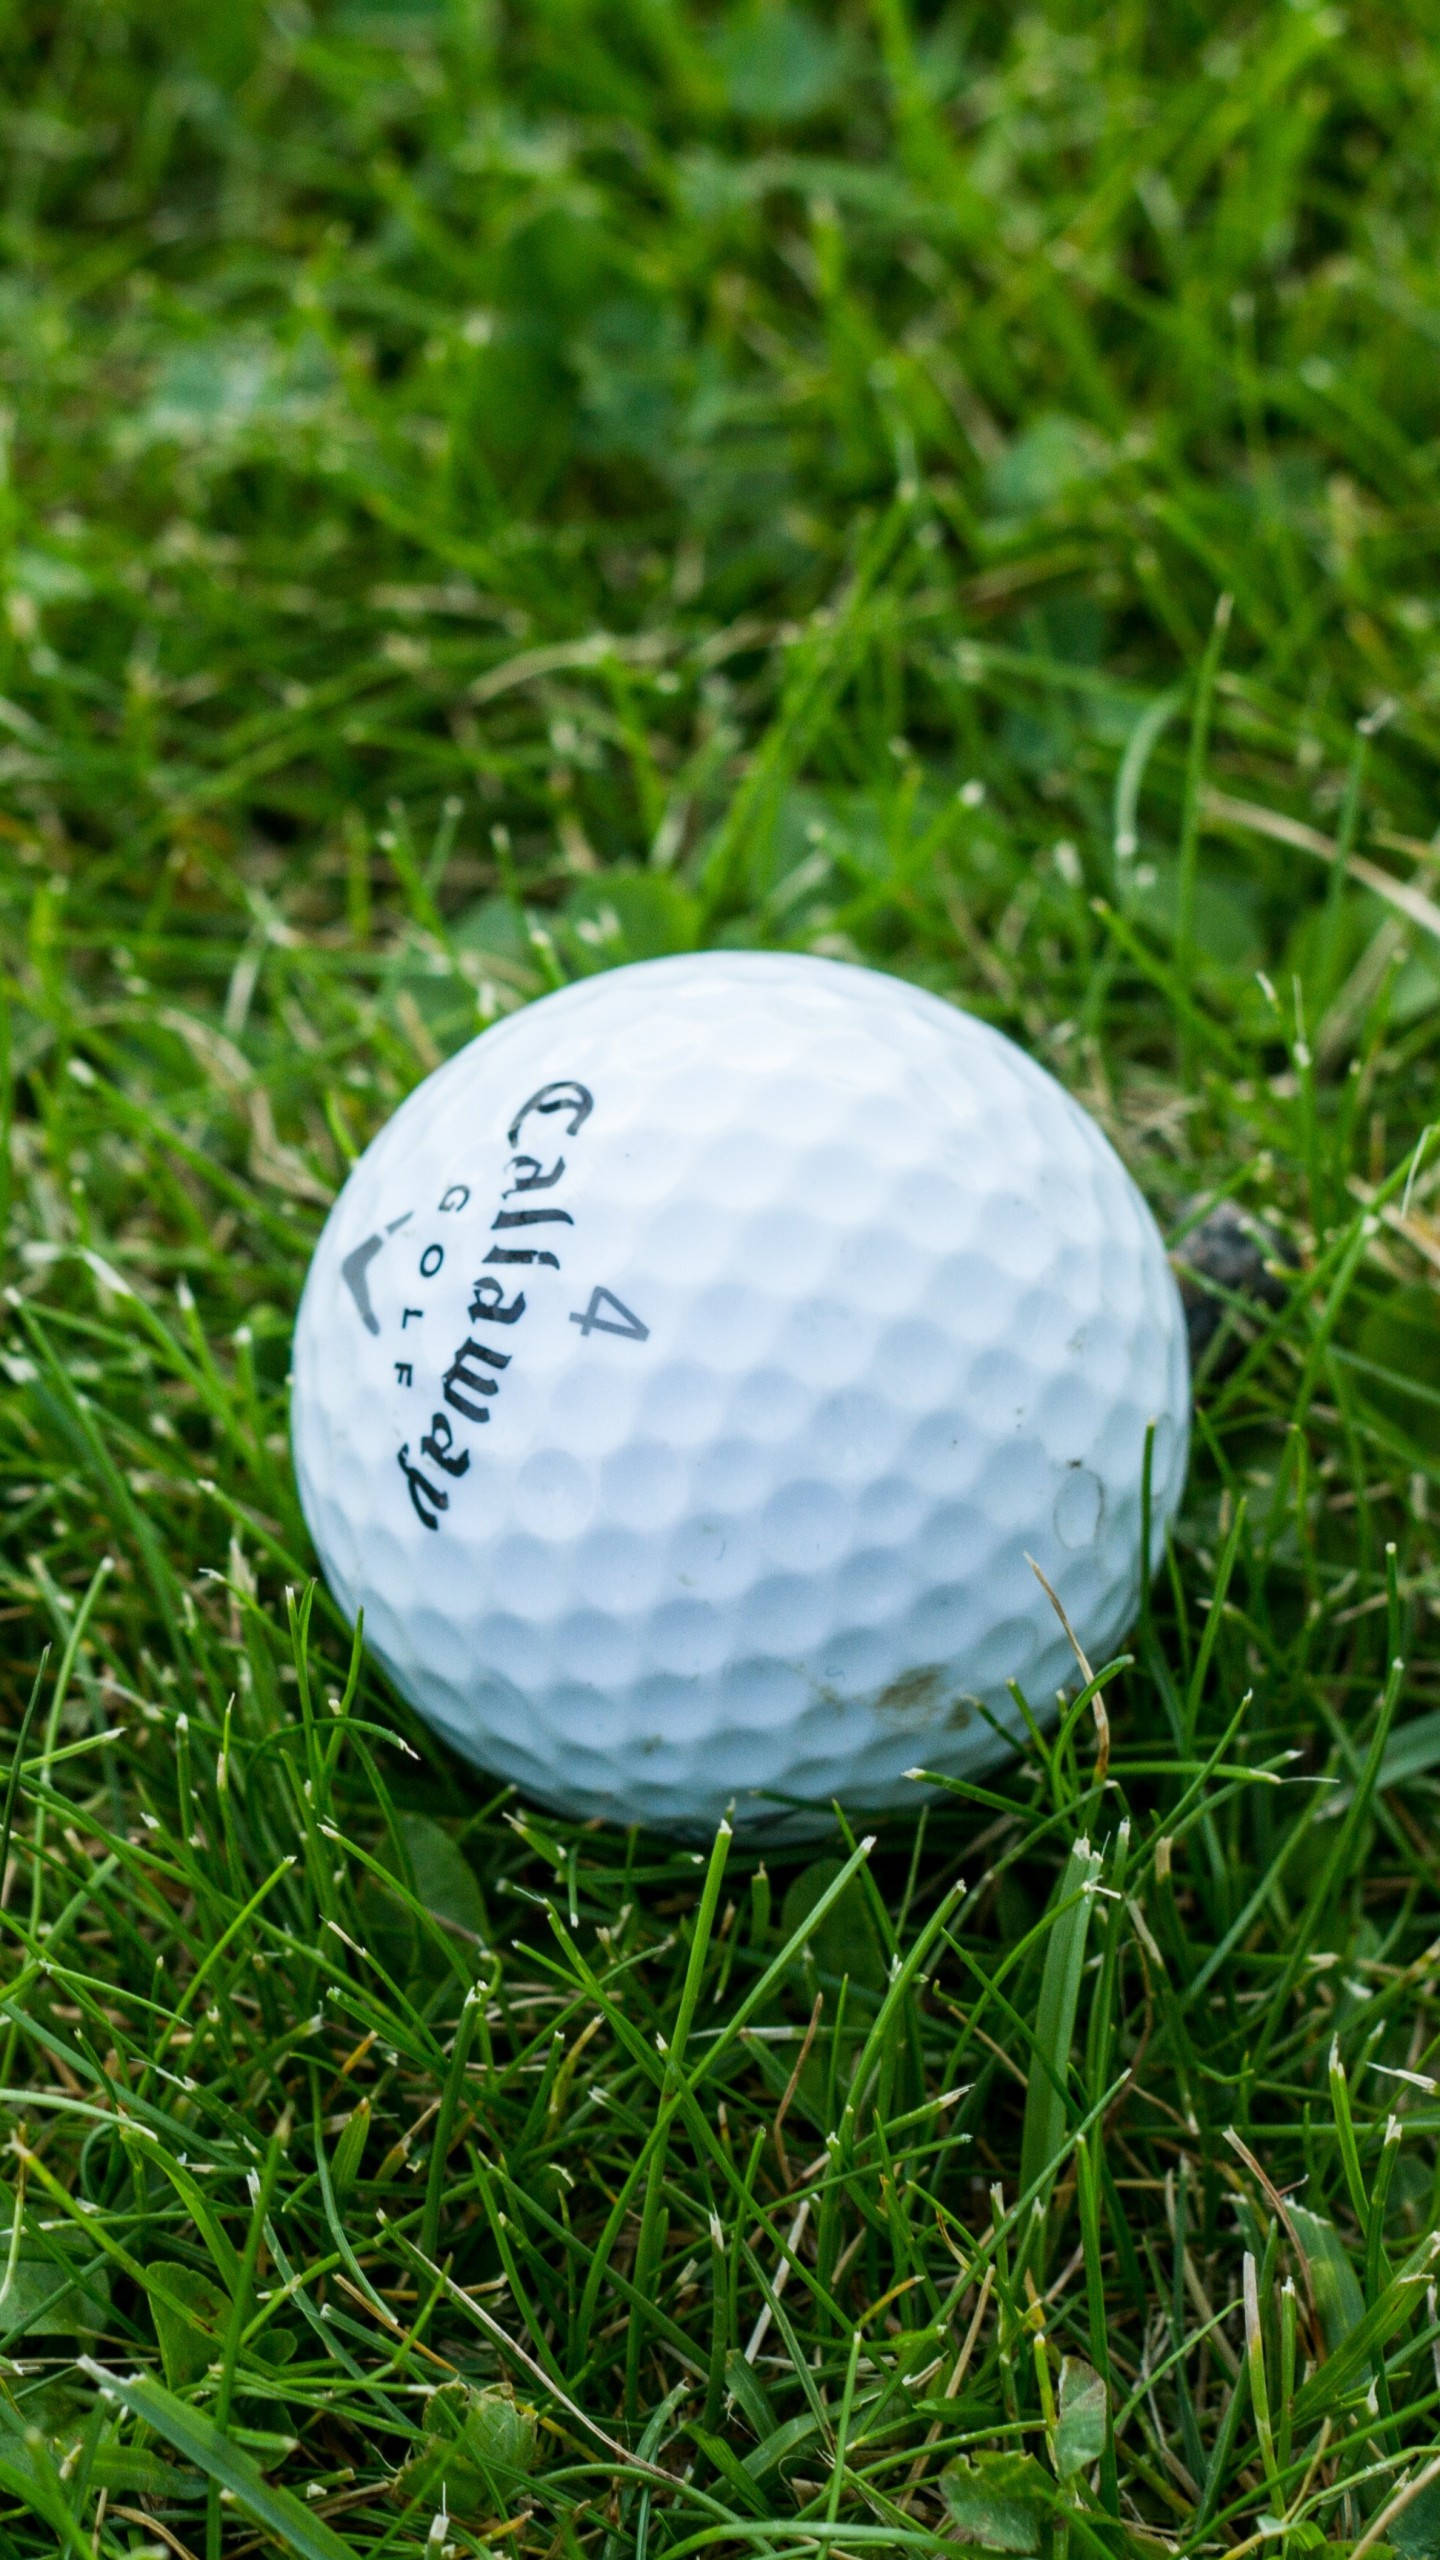 Download Piece Of White Ball Golf Iphone Wallpaper | Wallpapers.com